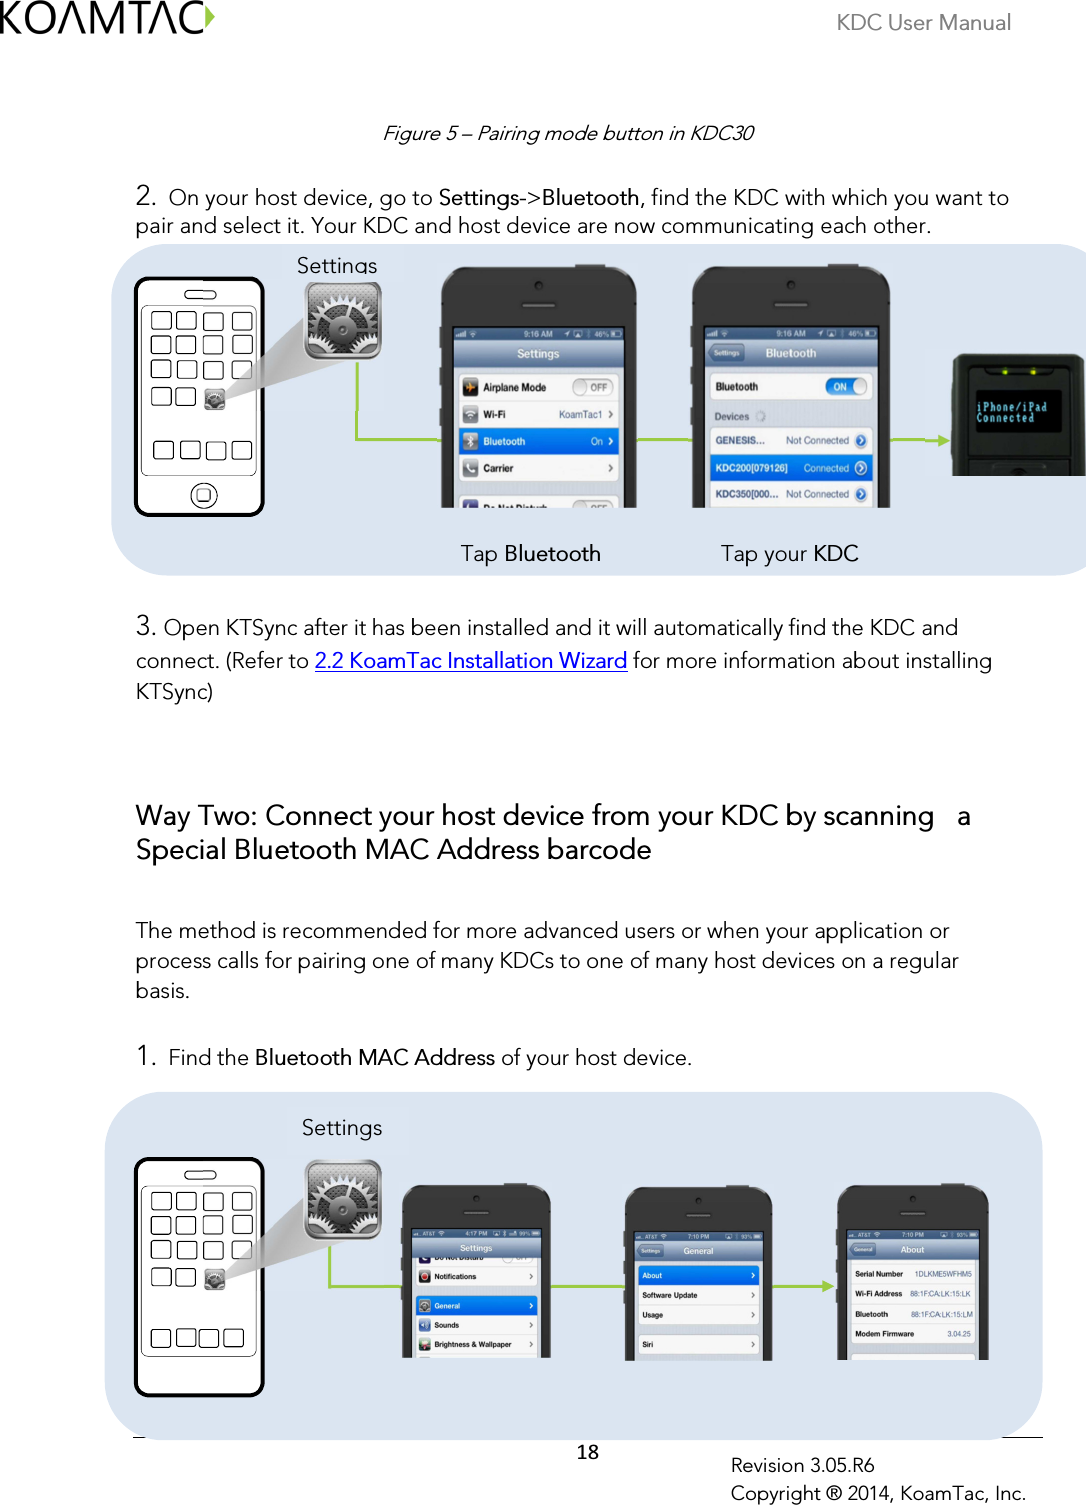 KDC User Manual  18 Revision 3.05.R6 Copyright ® 2014, KoamTac, Inc.                                                                                2. On your host device, go to Settings-&gt;Bluetooth, find the KDC with which you want to pair and select it. Your KDC and host device are now communicating each other.                                                                                                                                                                           Tap Bluetooth                     Tap your KDC   3. Open KTSync after it has been installed and it will automatically find the KDC and connect. (Refer to 2.2 KoamTac Installation Wizard for more information about installing KTSync)     Way Two: Connect your host device from your KDC by scanning   a Special Bluetooth MAC Address barcode  The method is recommended for more advanced users or when your application or process calls for pairing one of many KDCs to one of many host devices on a regular basis.   1. Find the Bluetooth MAC Address of your host device.                                                                              Settings Settings Figure 5 – Pairing mode button in KDC30 